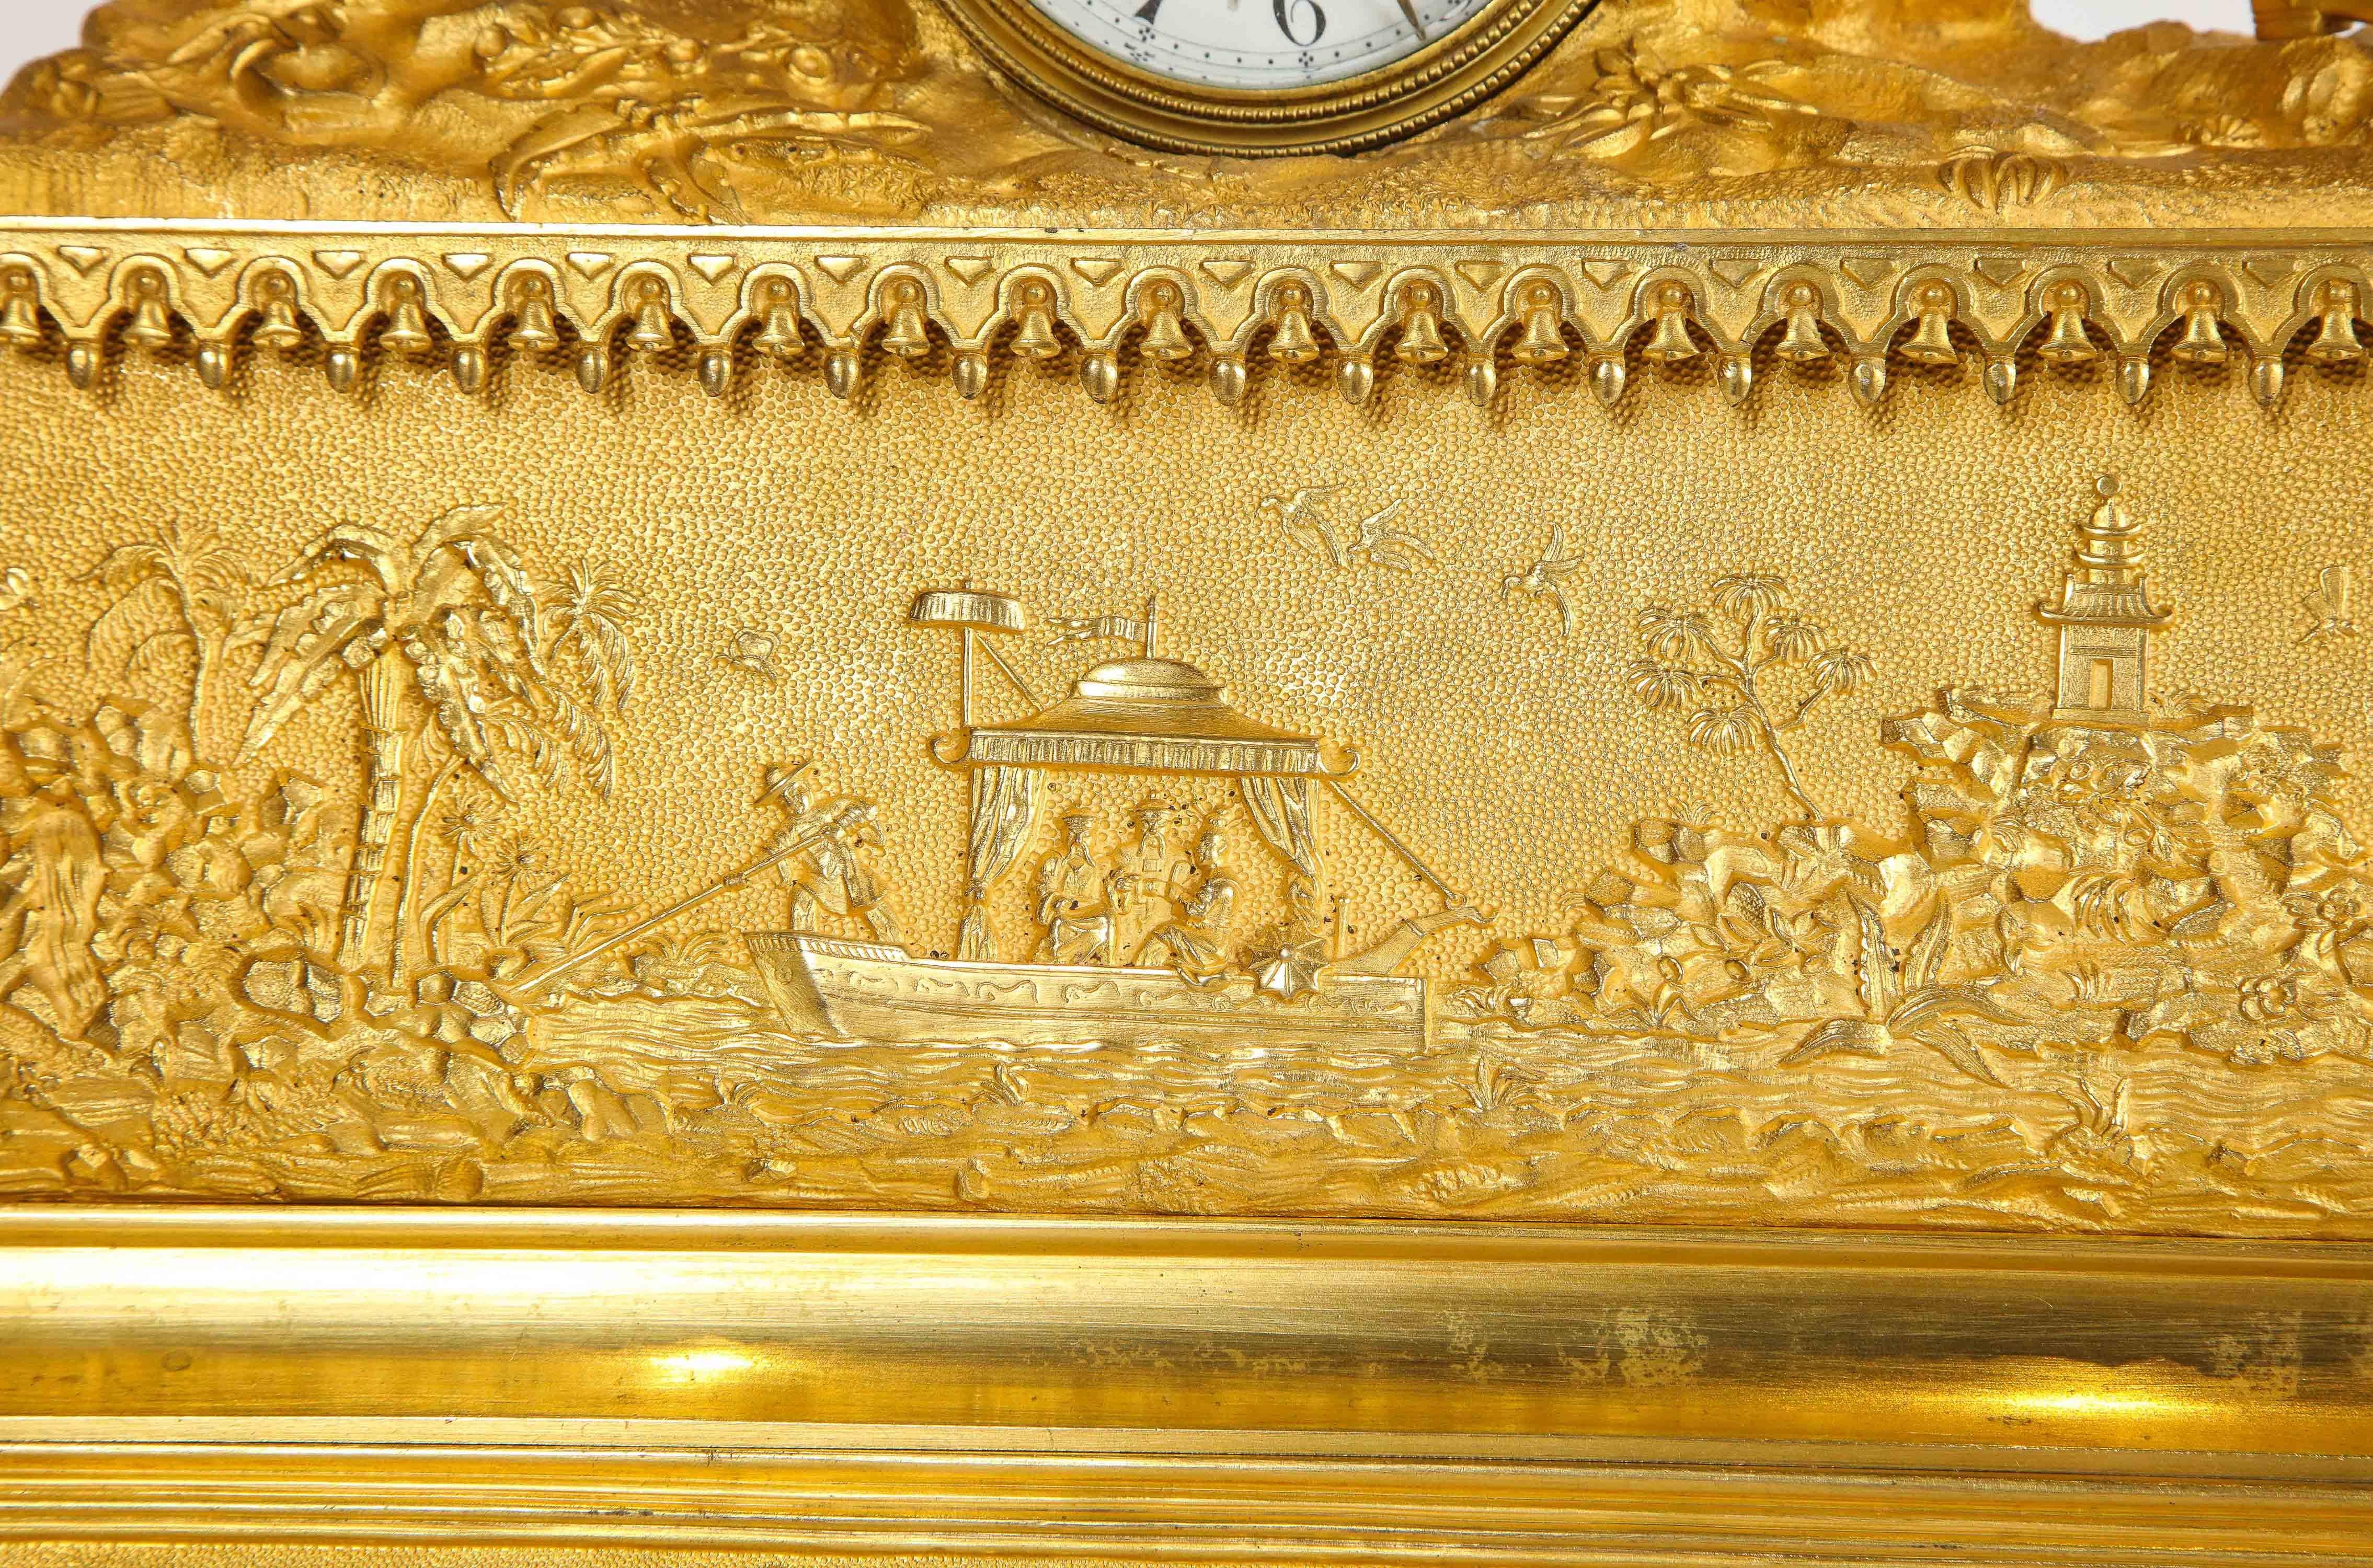 Exquisite French Charles X Ormolu Chinoiserie Figural Table Clock 3